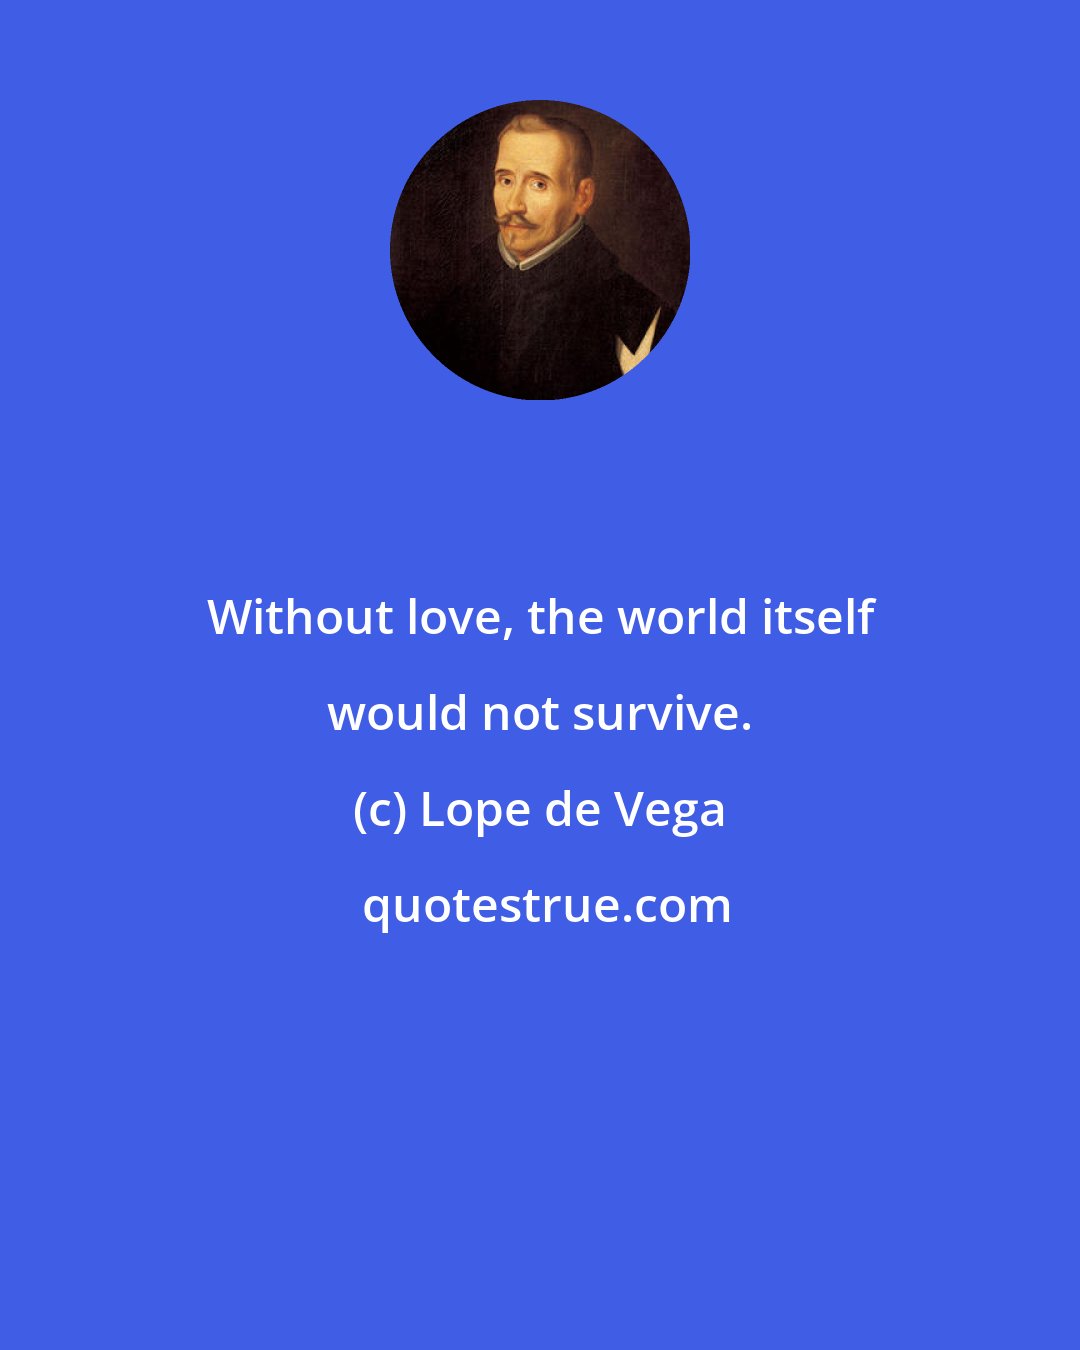 Lope de Vega: Without love, the world itself would not survive.